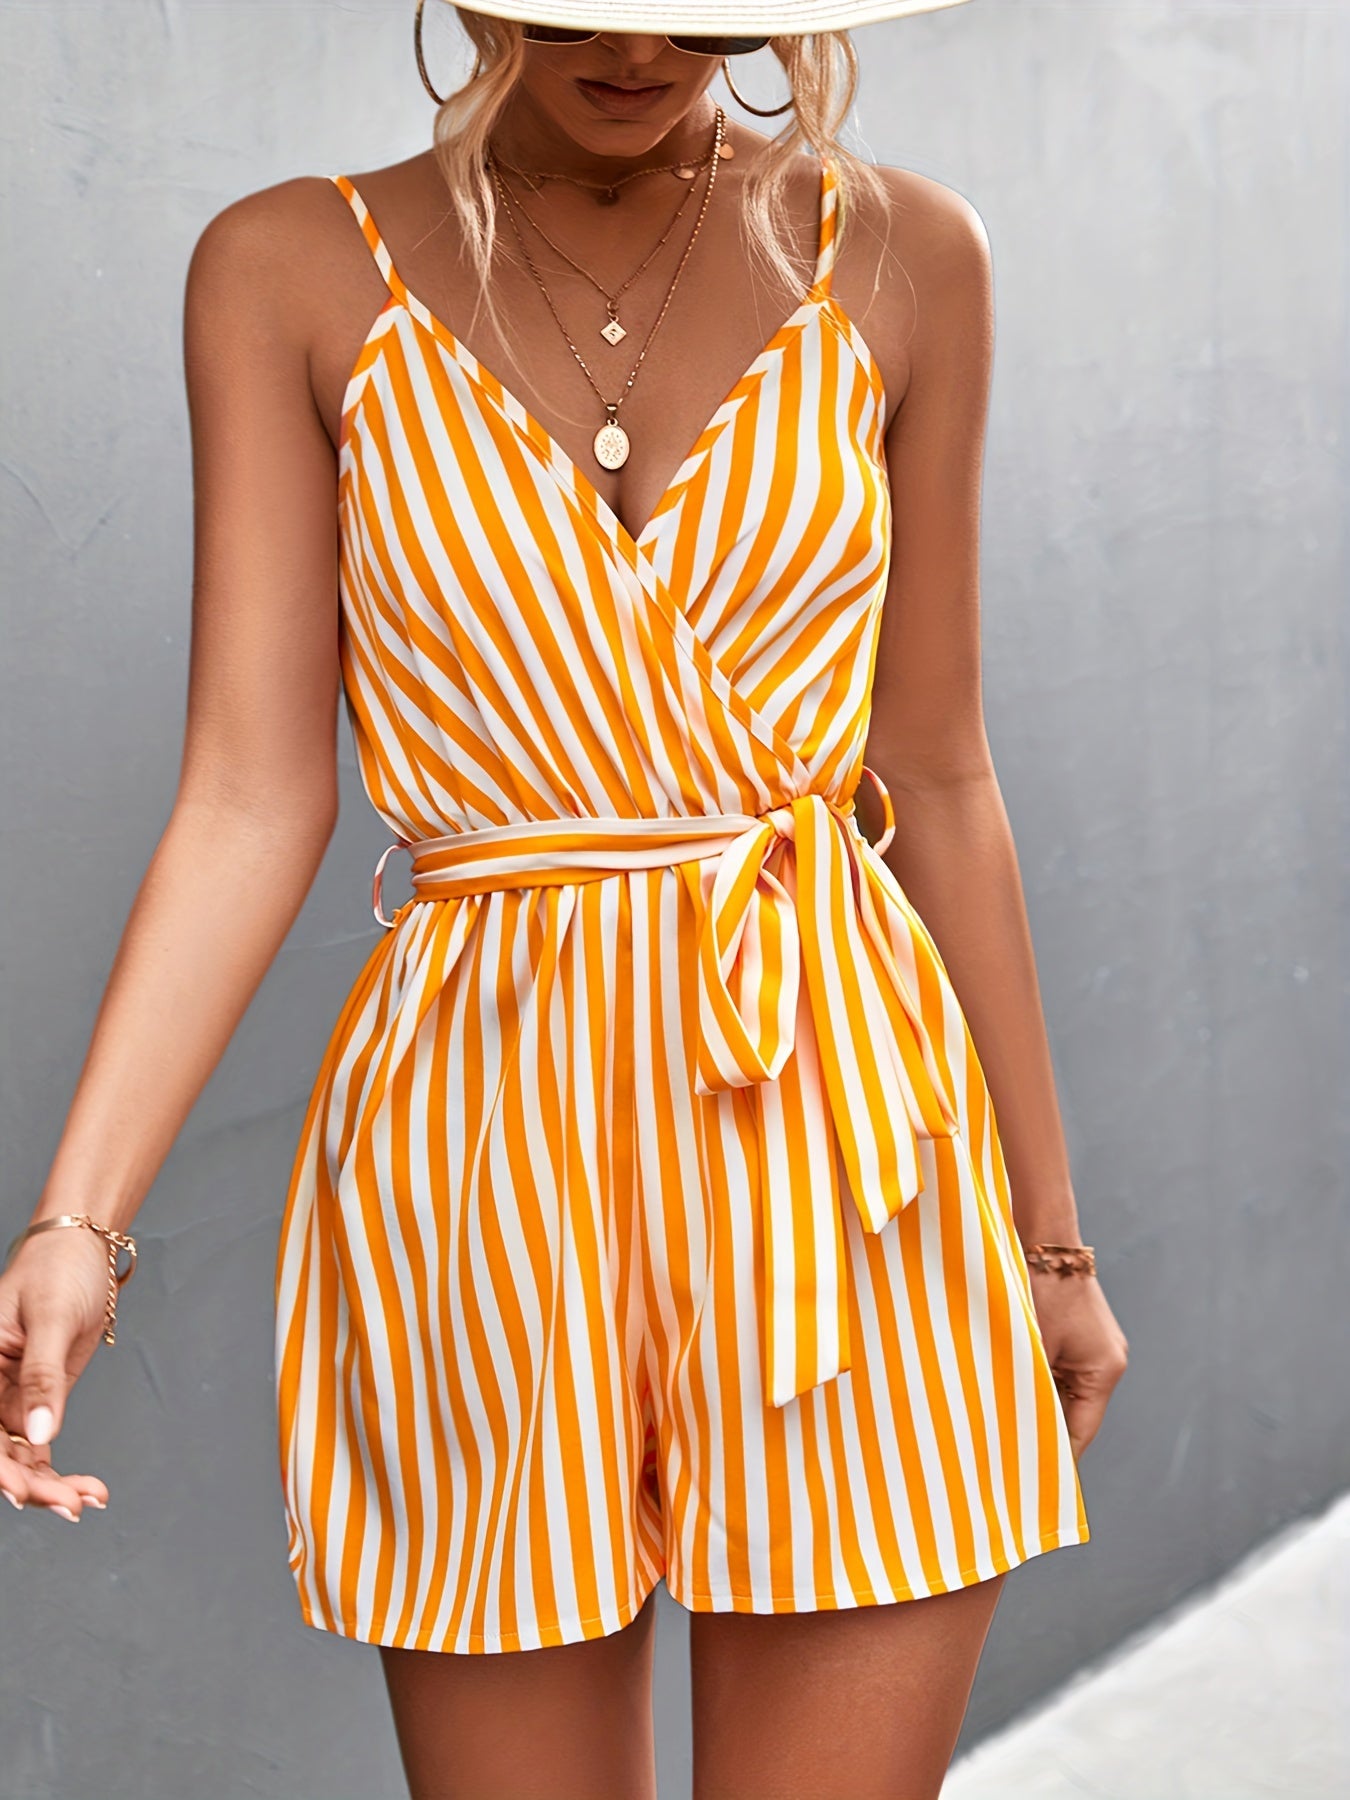 Striped Backless Cami Romper Jumpsuit, Casual Sleeveless V-neck Romper Jumpsuit, Women's Clothing